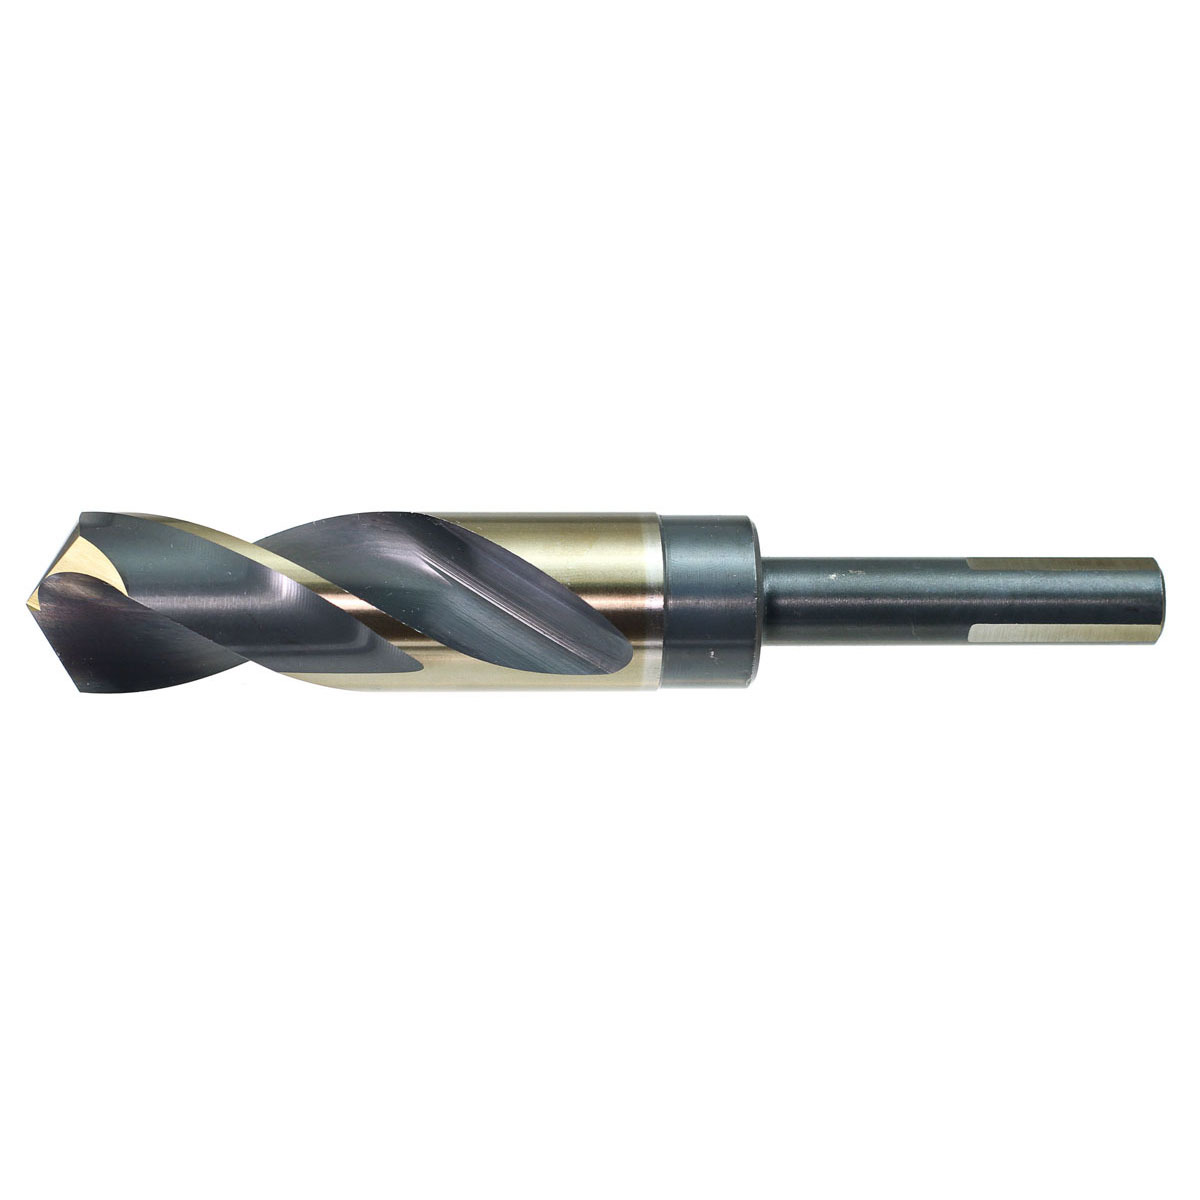 New D//ACO Series 11//16 Cobalt Reduced Shank Drill Bit with 3//8 Shank